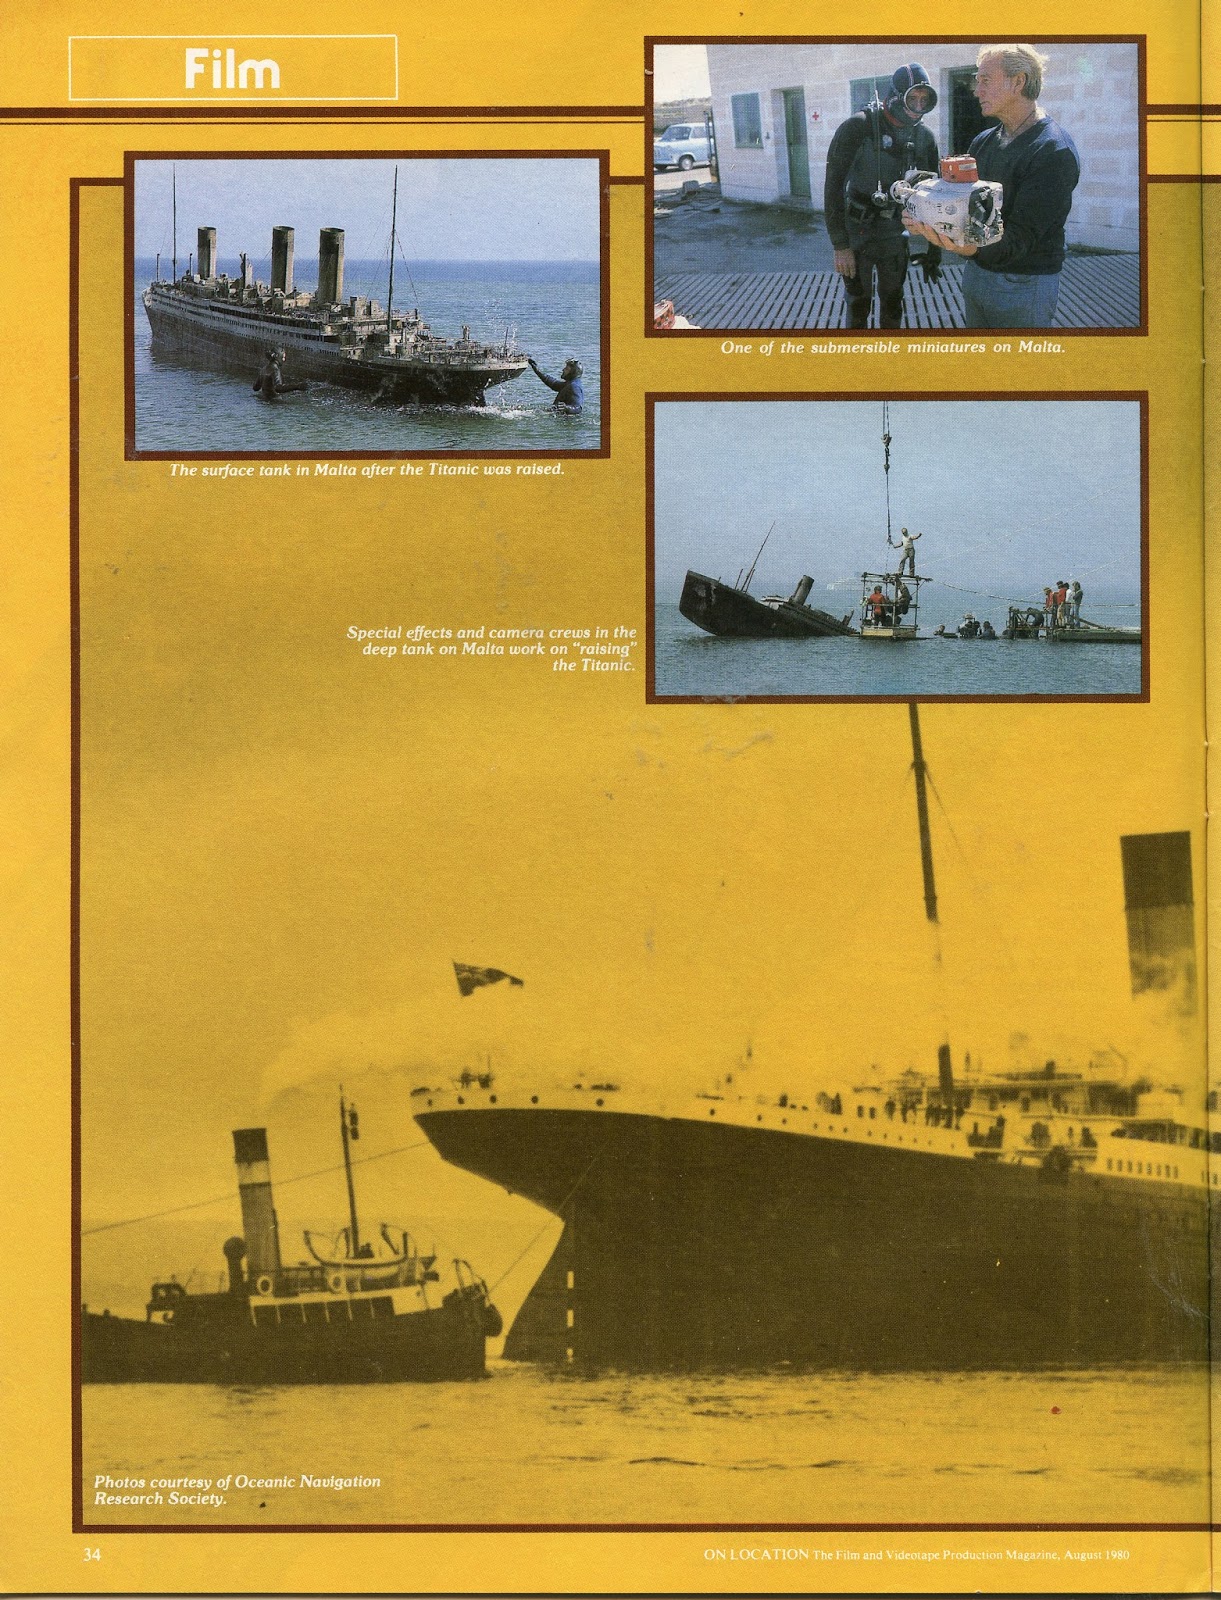 Clive Cussler Book Collecting: Raise the Titanic - On Location Magazine -  August 1980